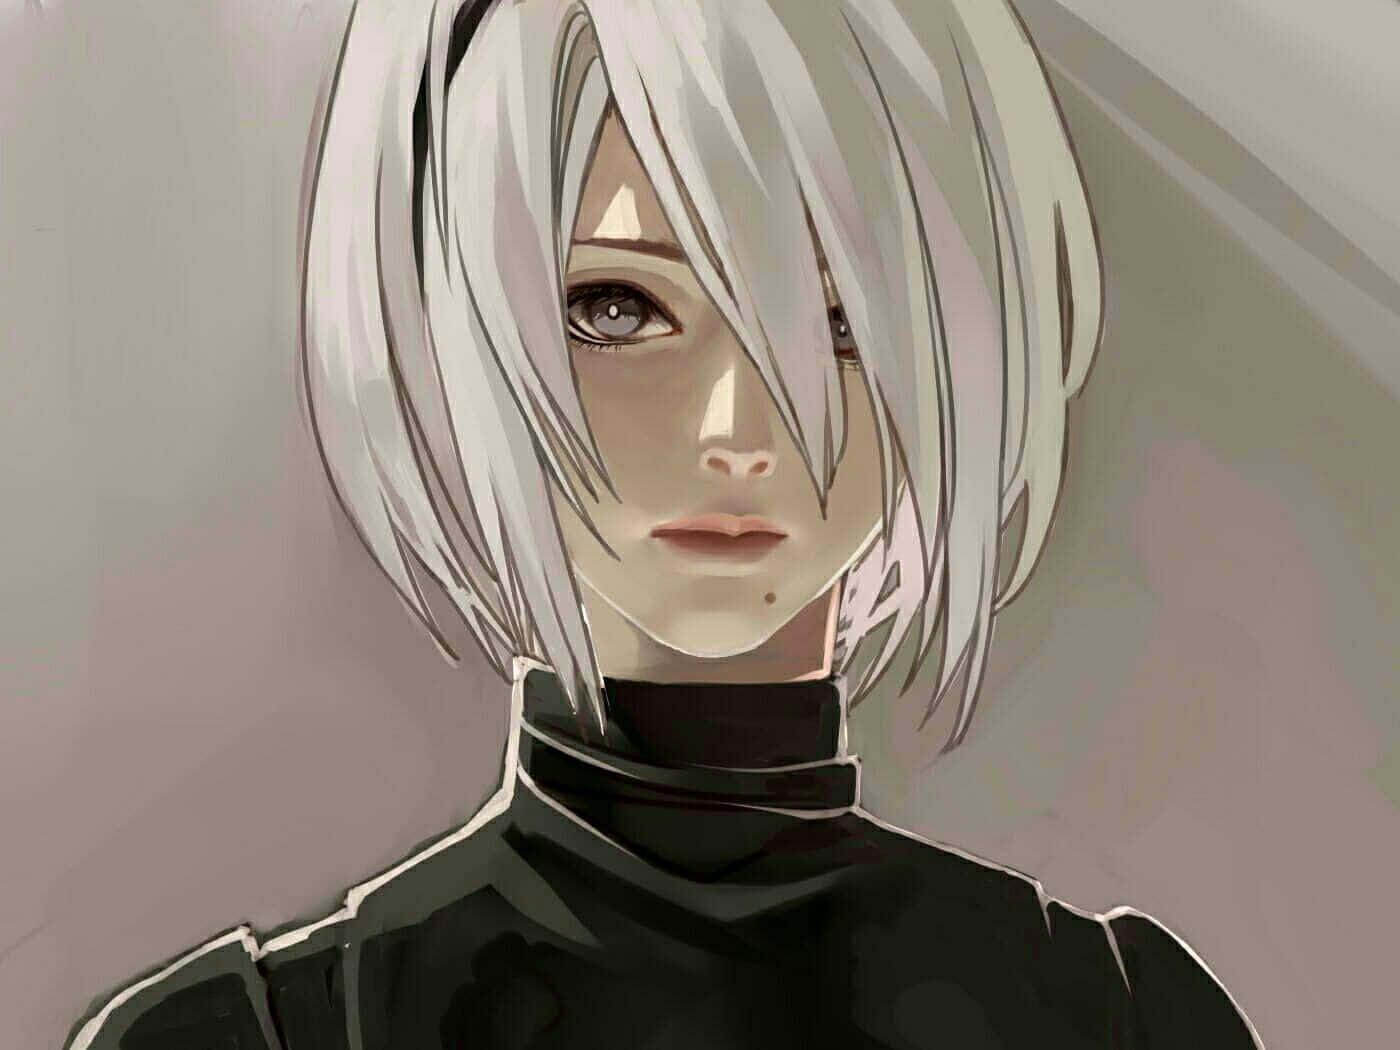 2B, a Cool and Collected Combat Android